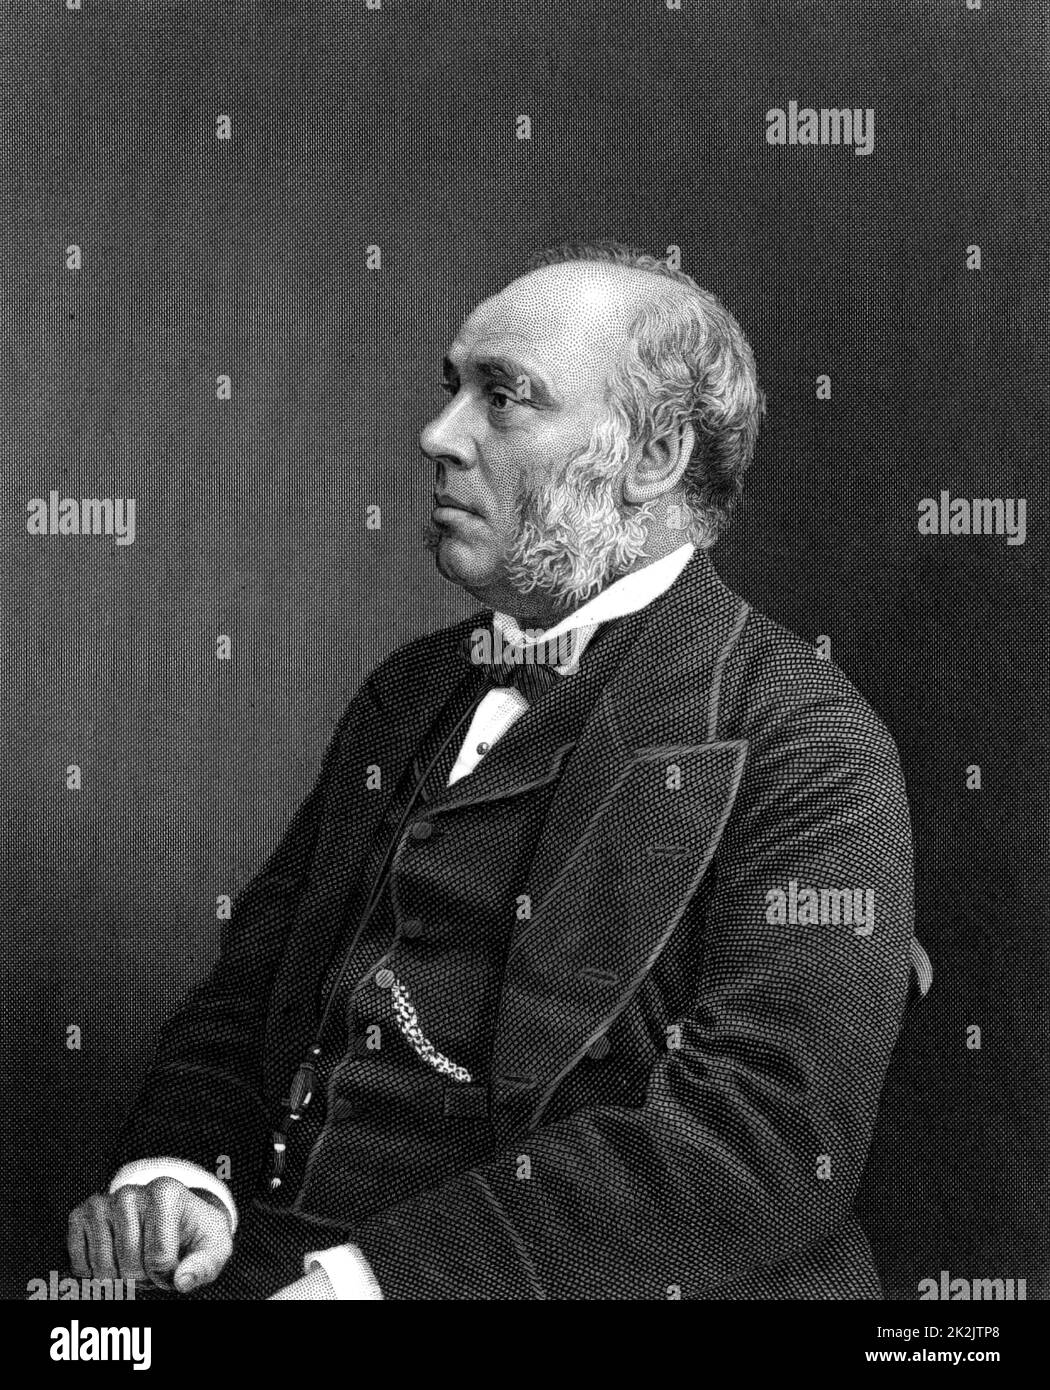 William Henry Smith, English businessman and politician. He joined his father's newsagent business in 1846 and introduced the selling of books and newspapers at railway stations. Elected Conservative Member of Parliament for Westminster in 1868. In 1877 he was appointed First Lord of the Admiralty. Engraving c1885. Stock Photo